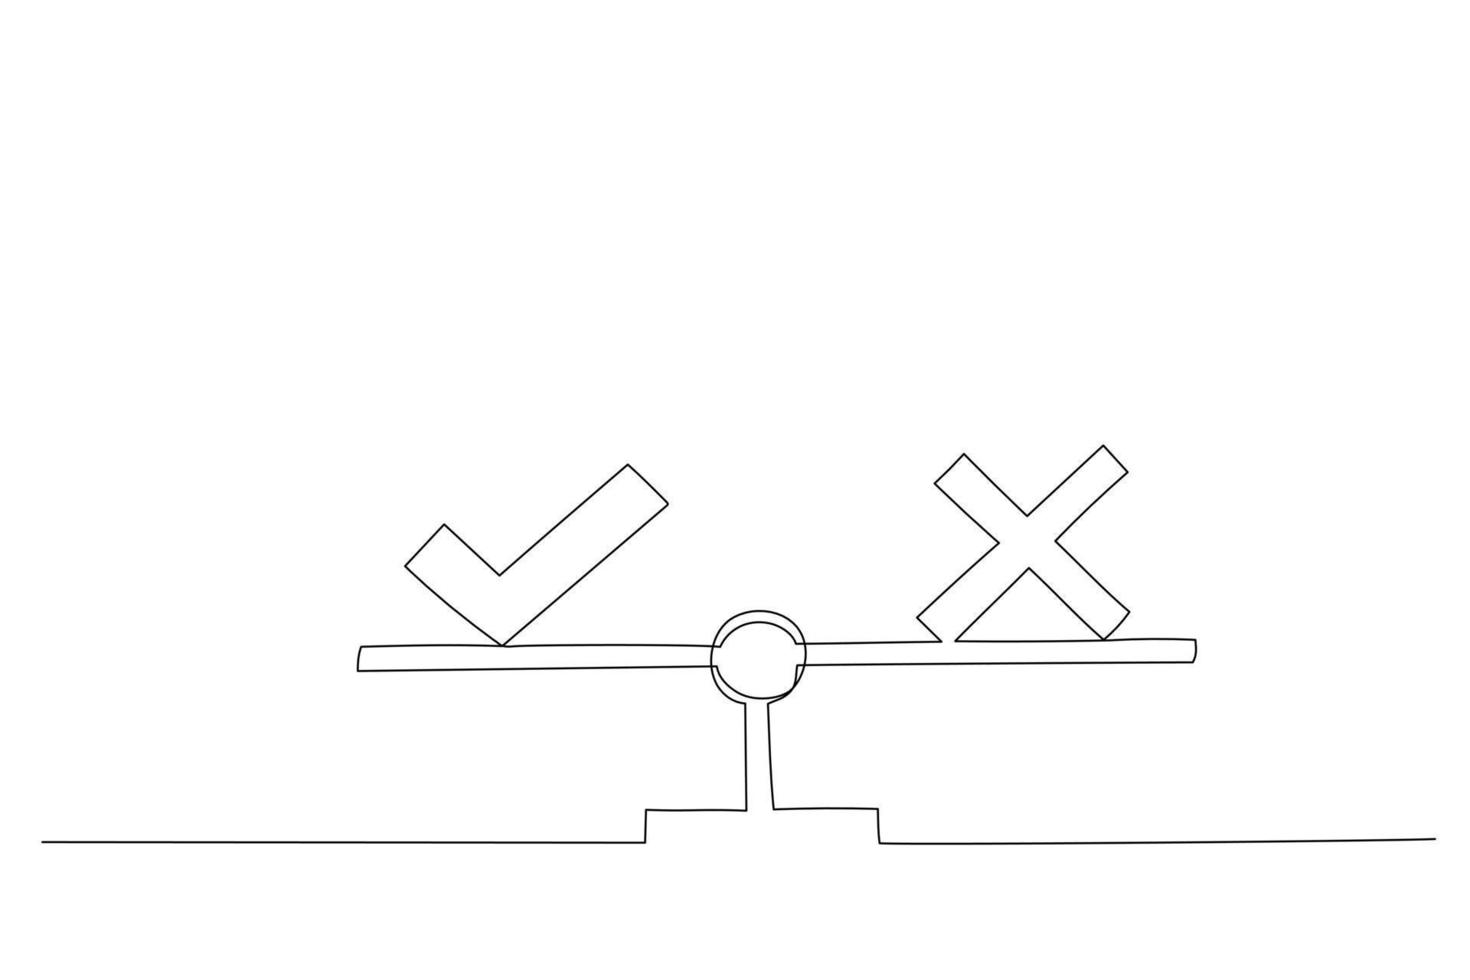 Cartoon of weight scales weighing cross and check mark. Choice, decision concept. Single continuous line art style vector